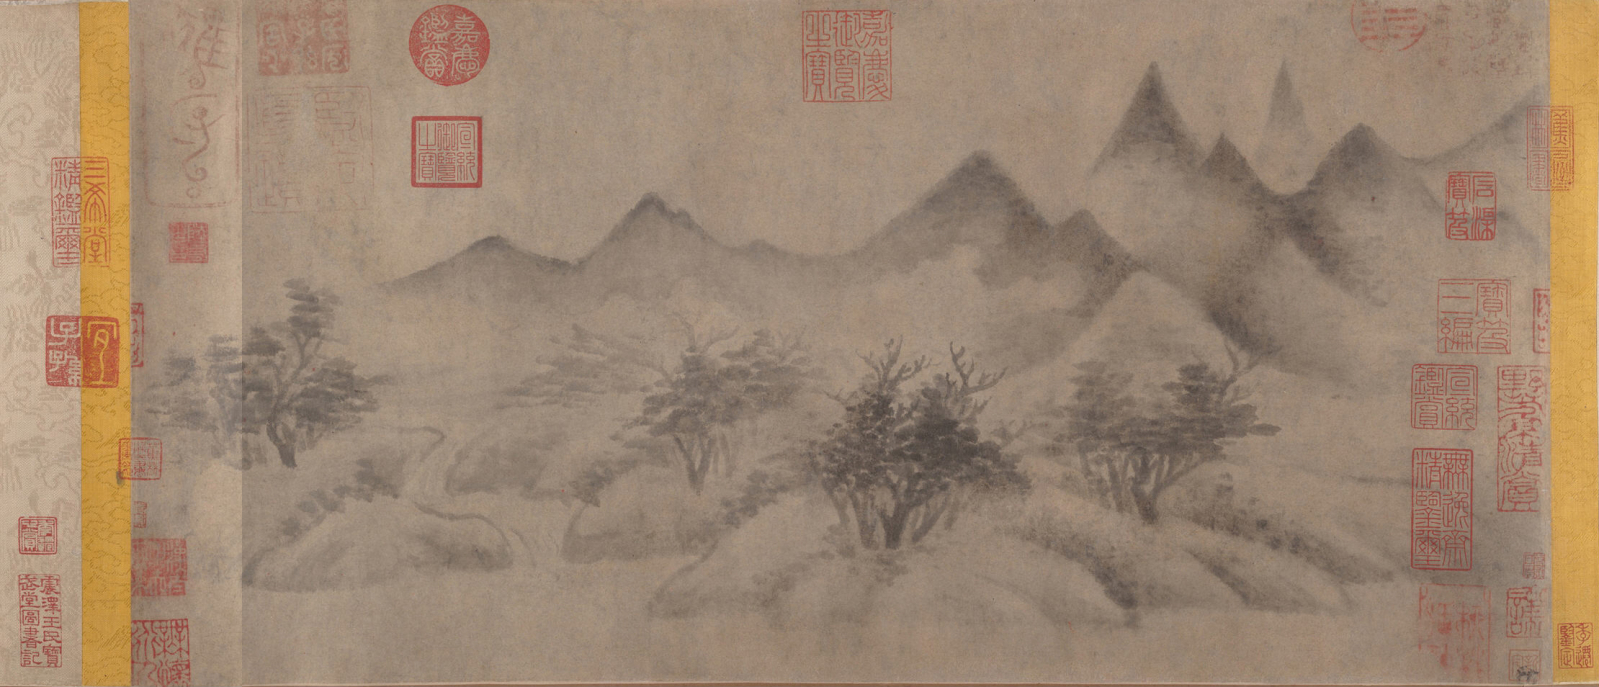 The Resilience of the Song Dynasty 